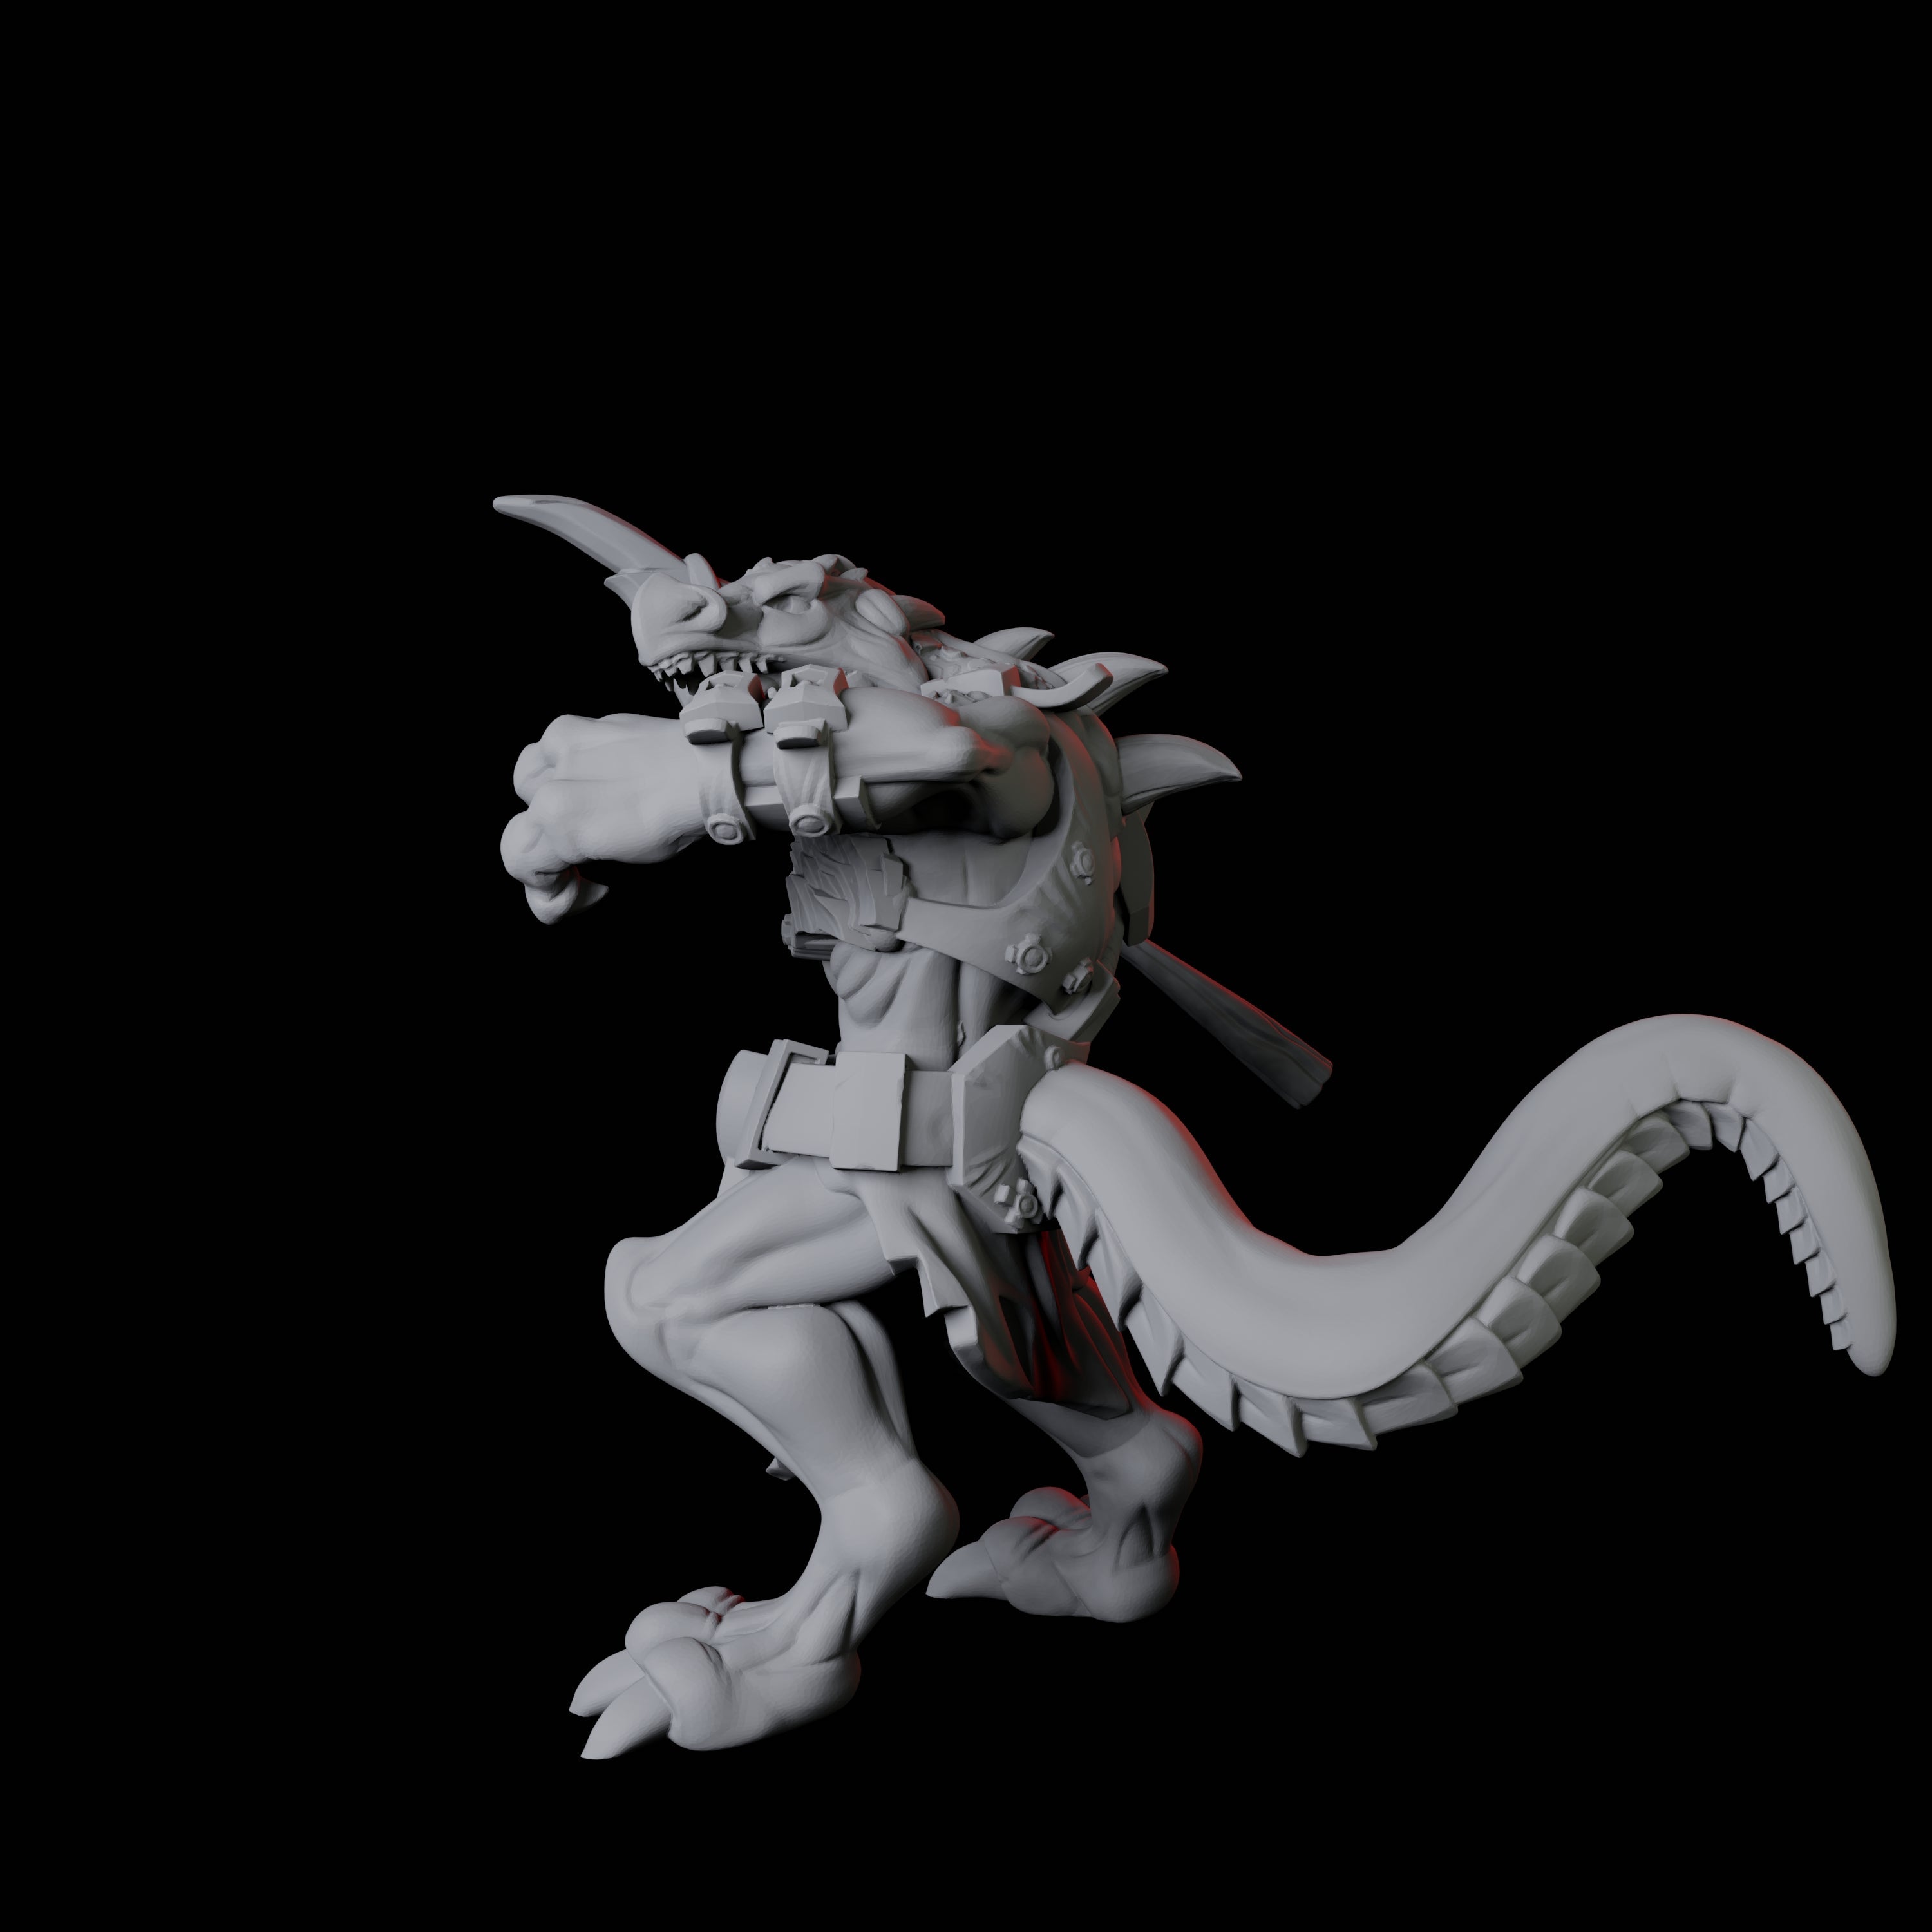 Kobold Ranger B Miniature for Dungeons and Dragons, Pathfinder or other TTRPGs